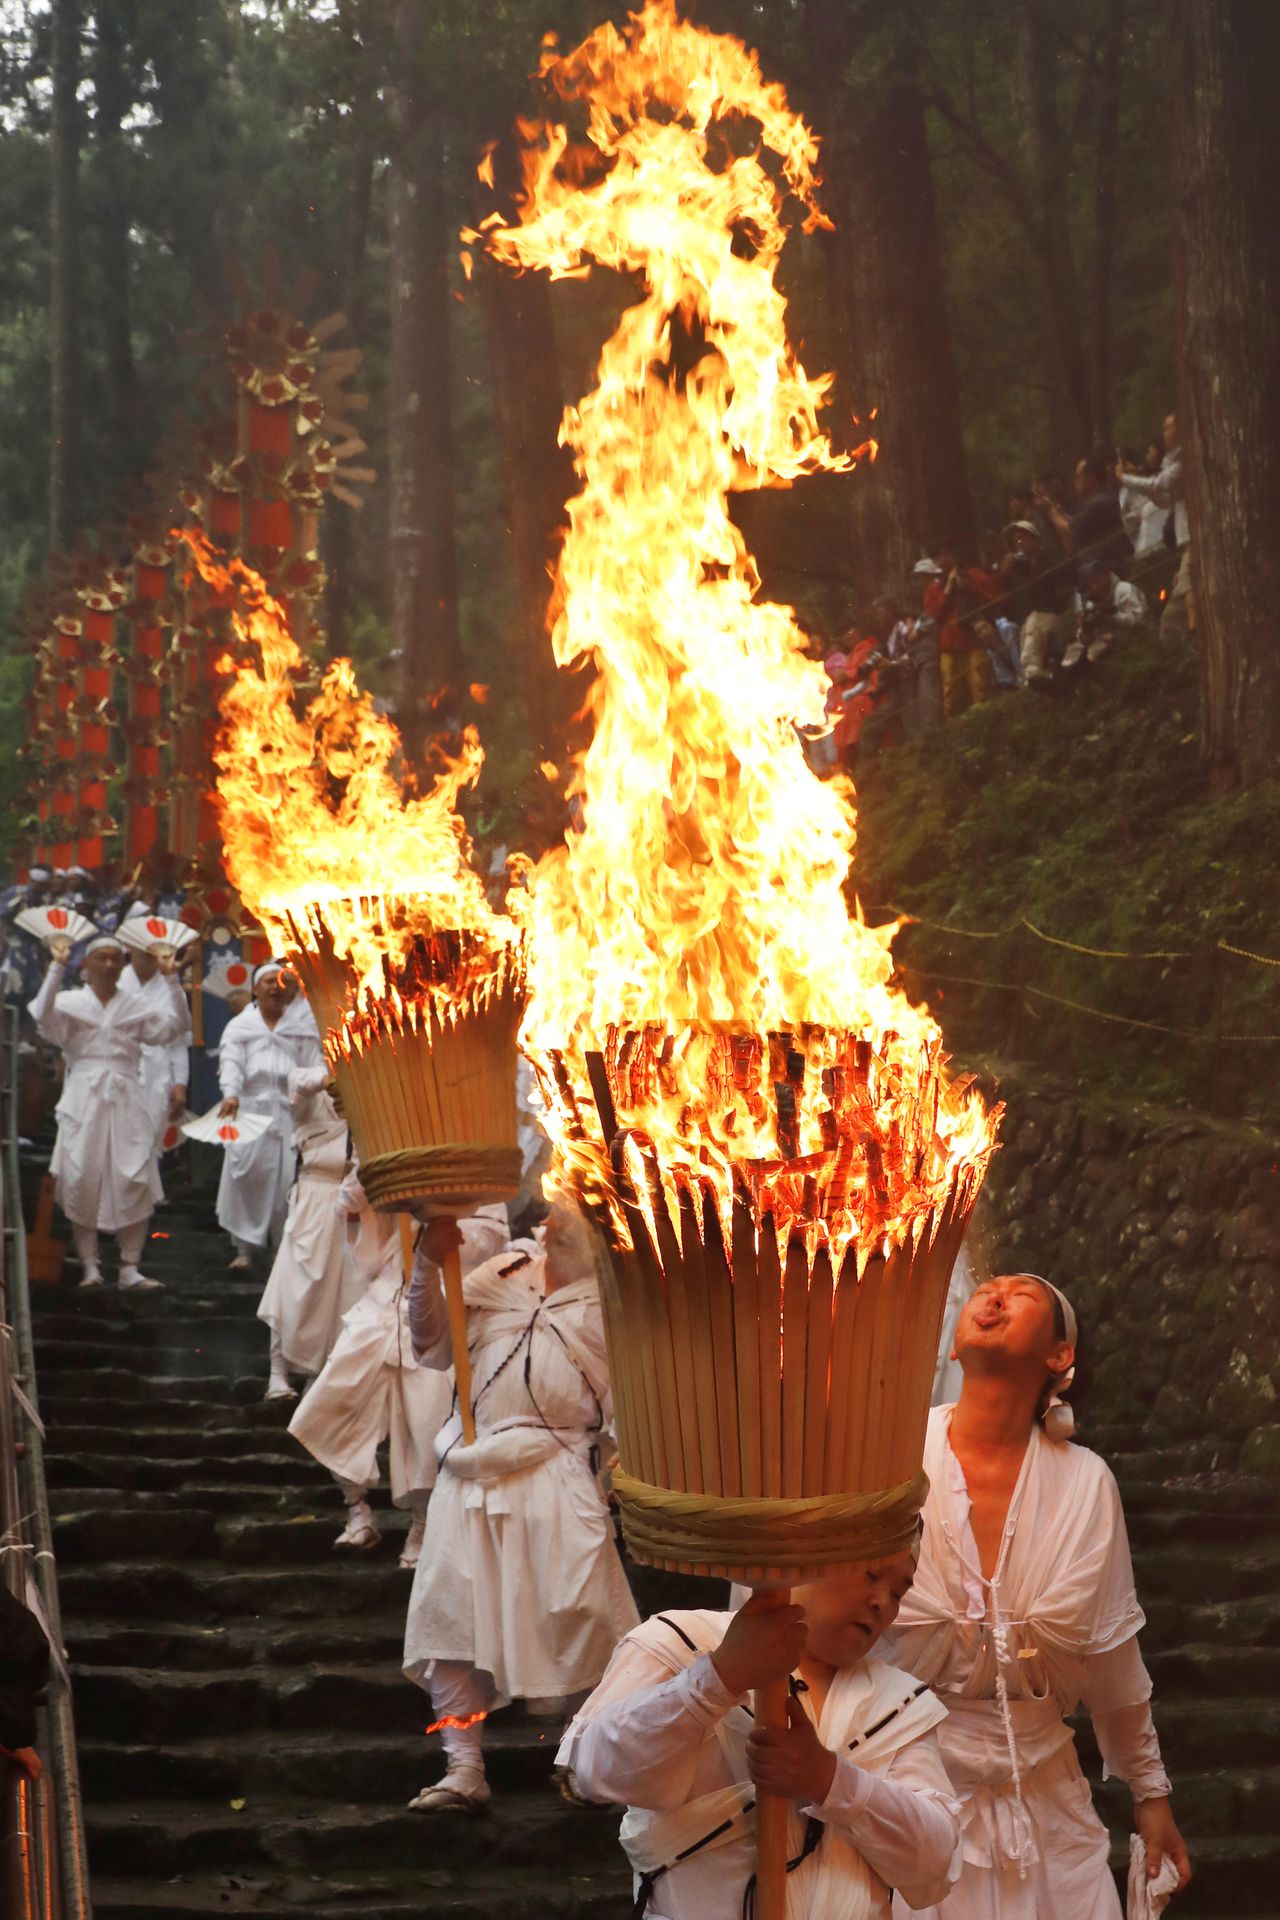 Parishioners carry torches to purify the 133 stone steps to the shrine. (© Haga Library)